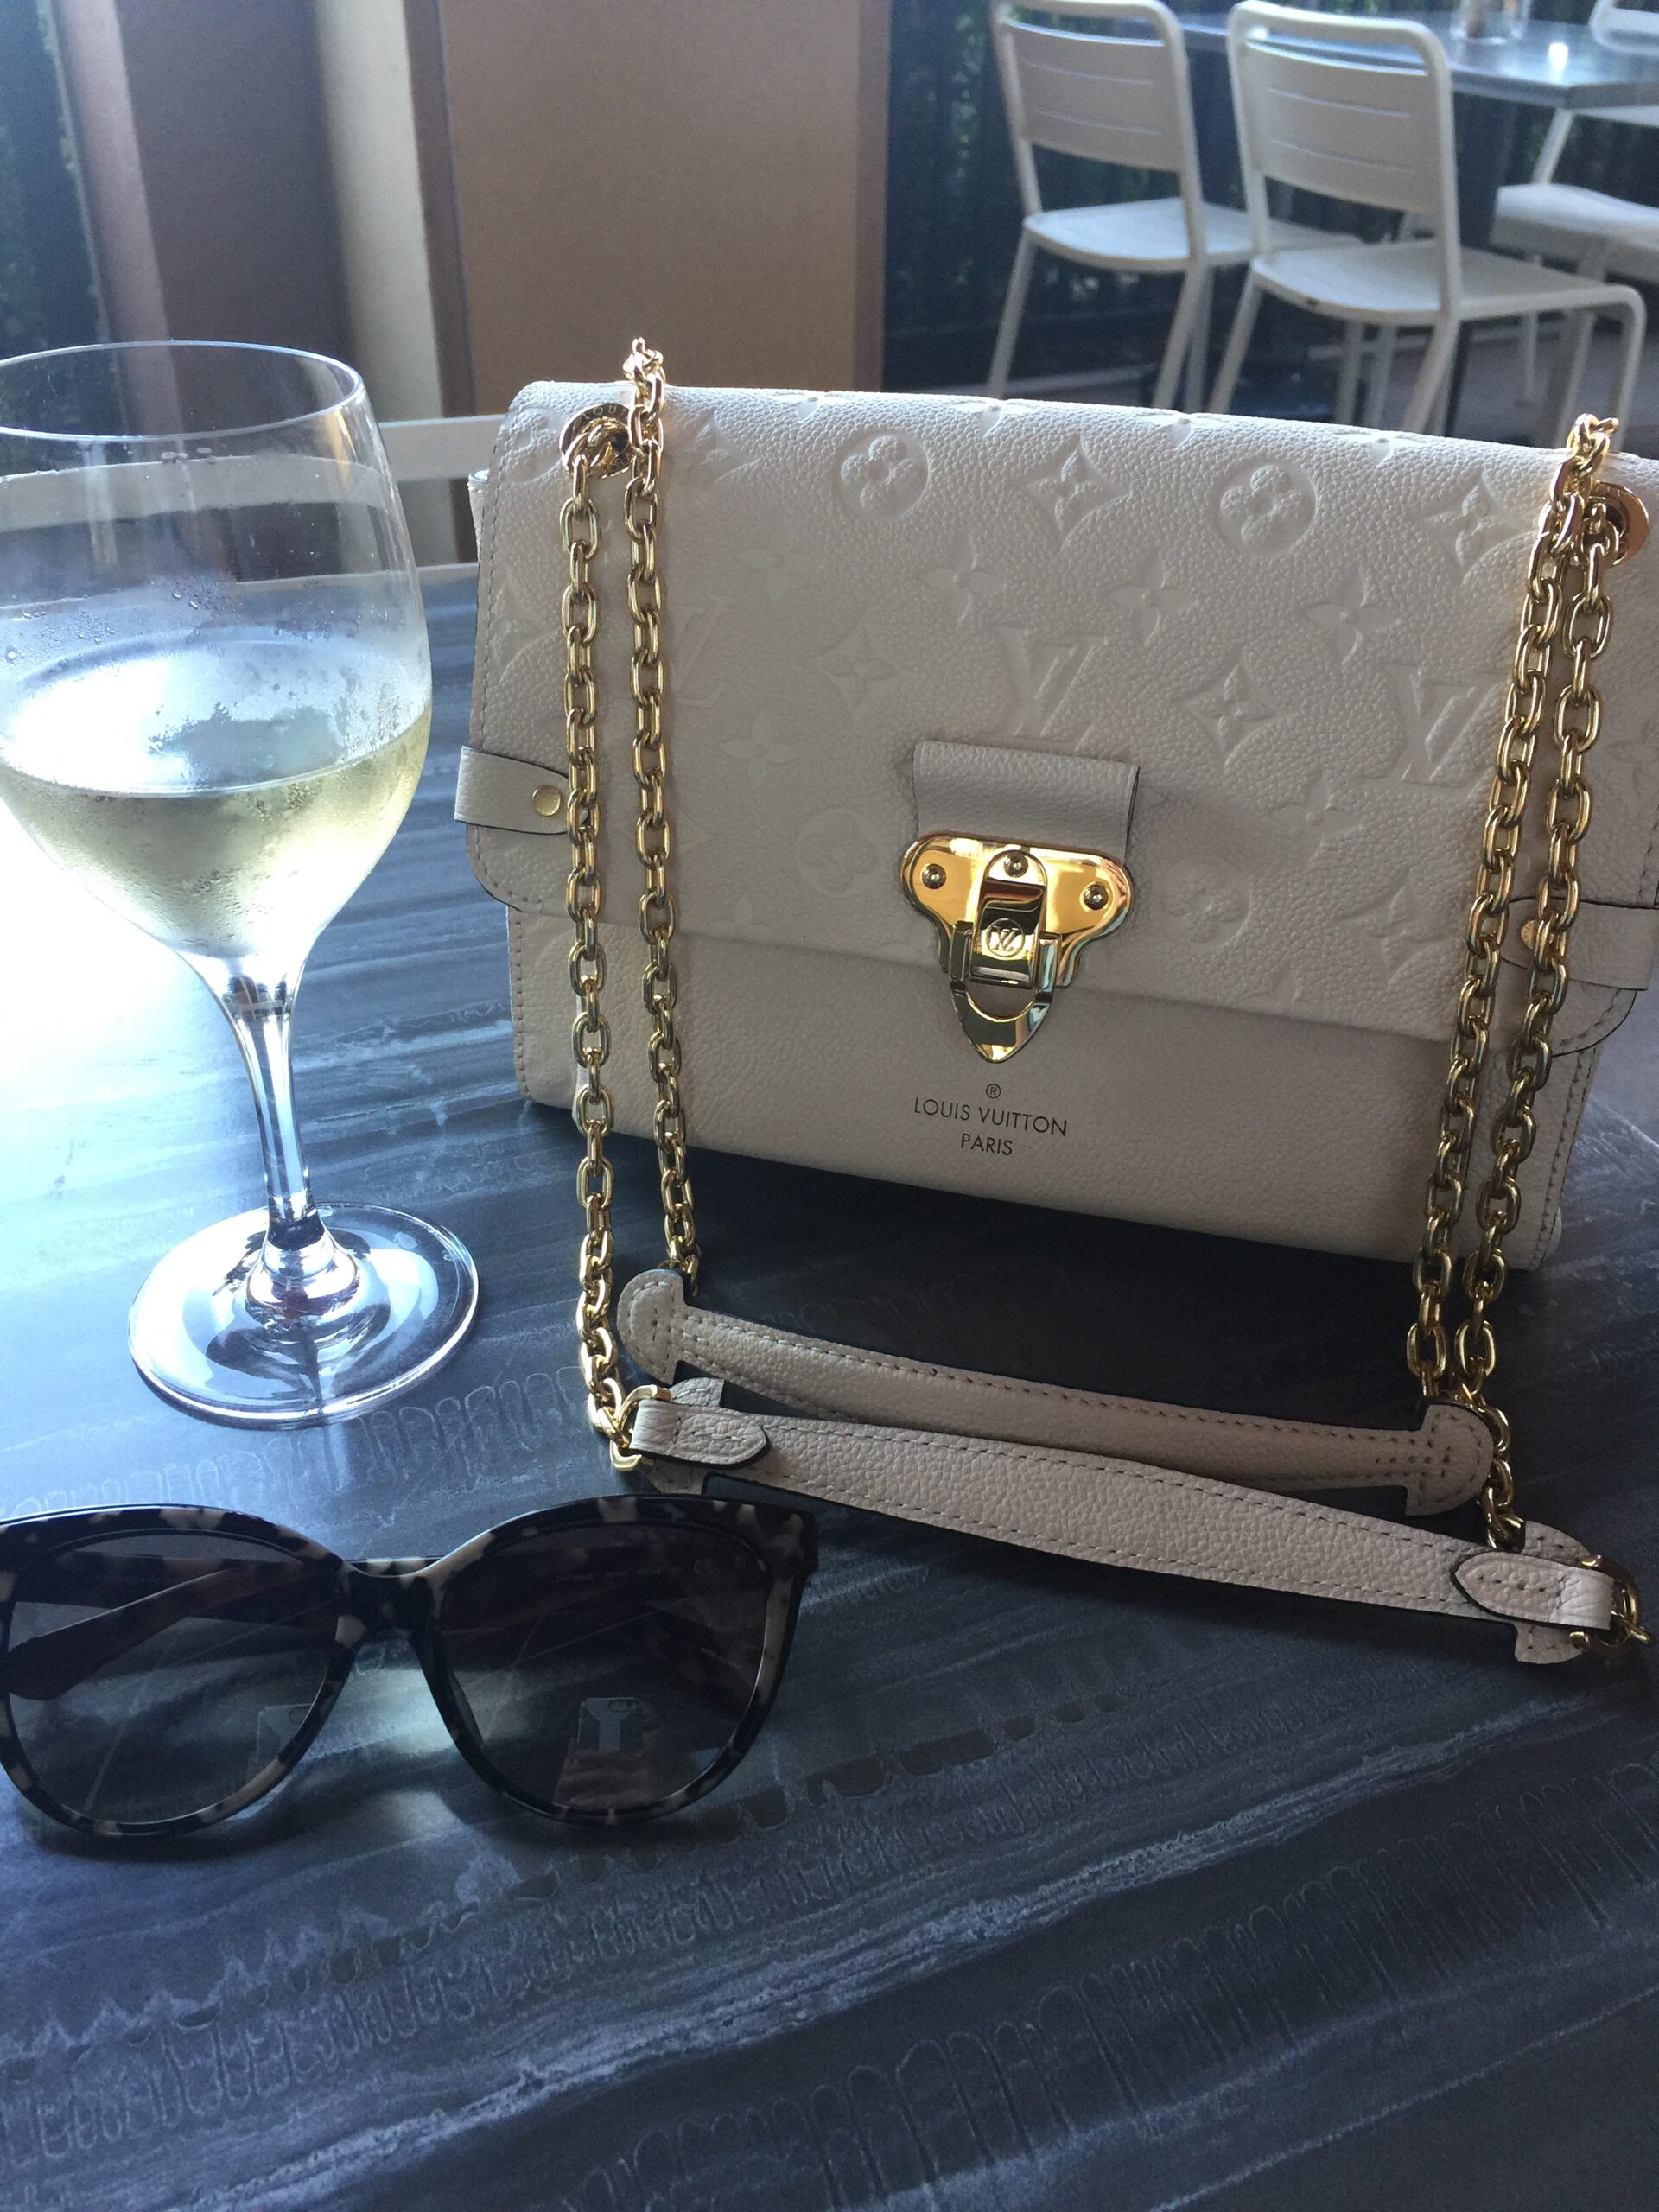 The Ultimate Summer Accessory: Why a White Purse is a Must-Have